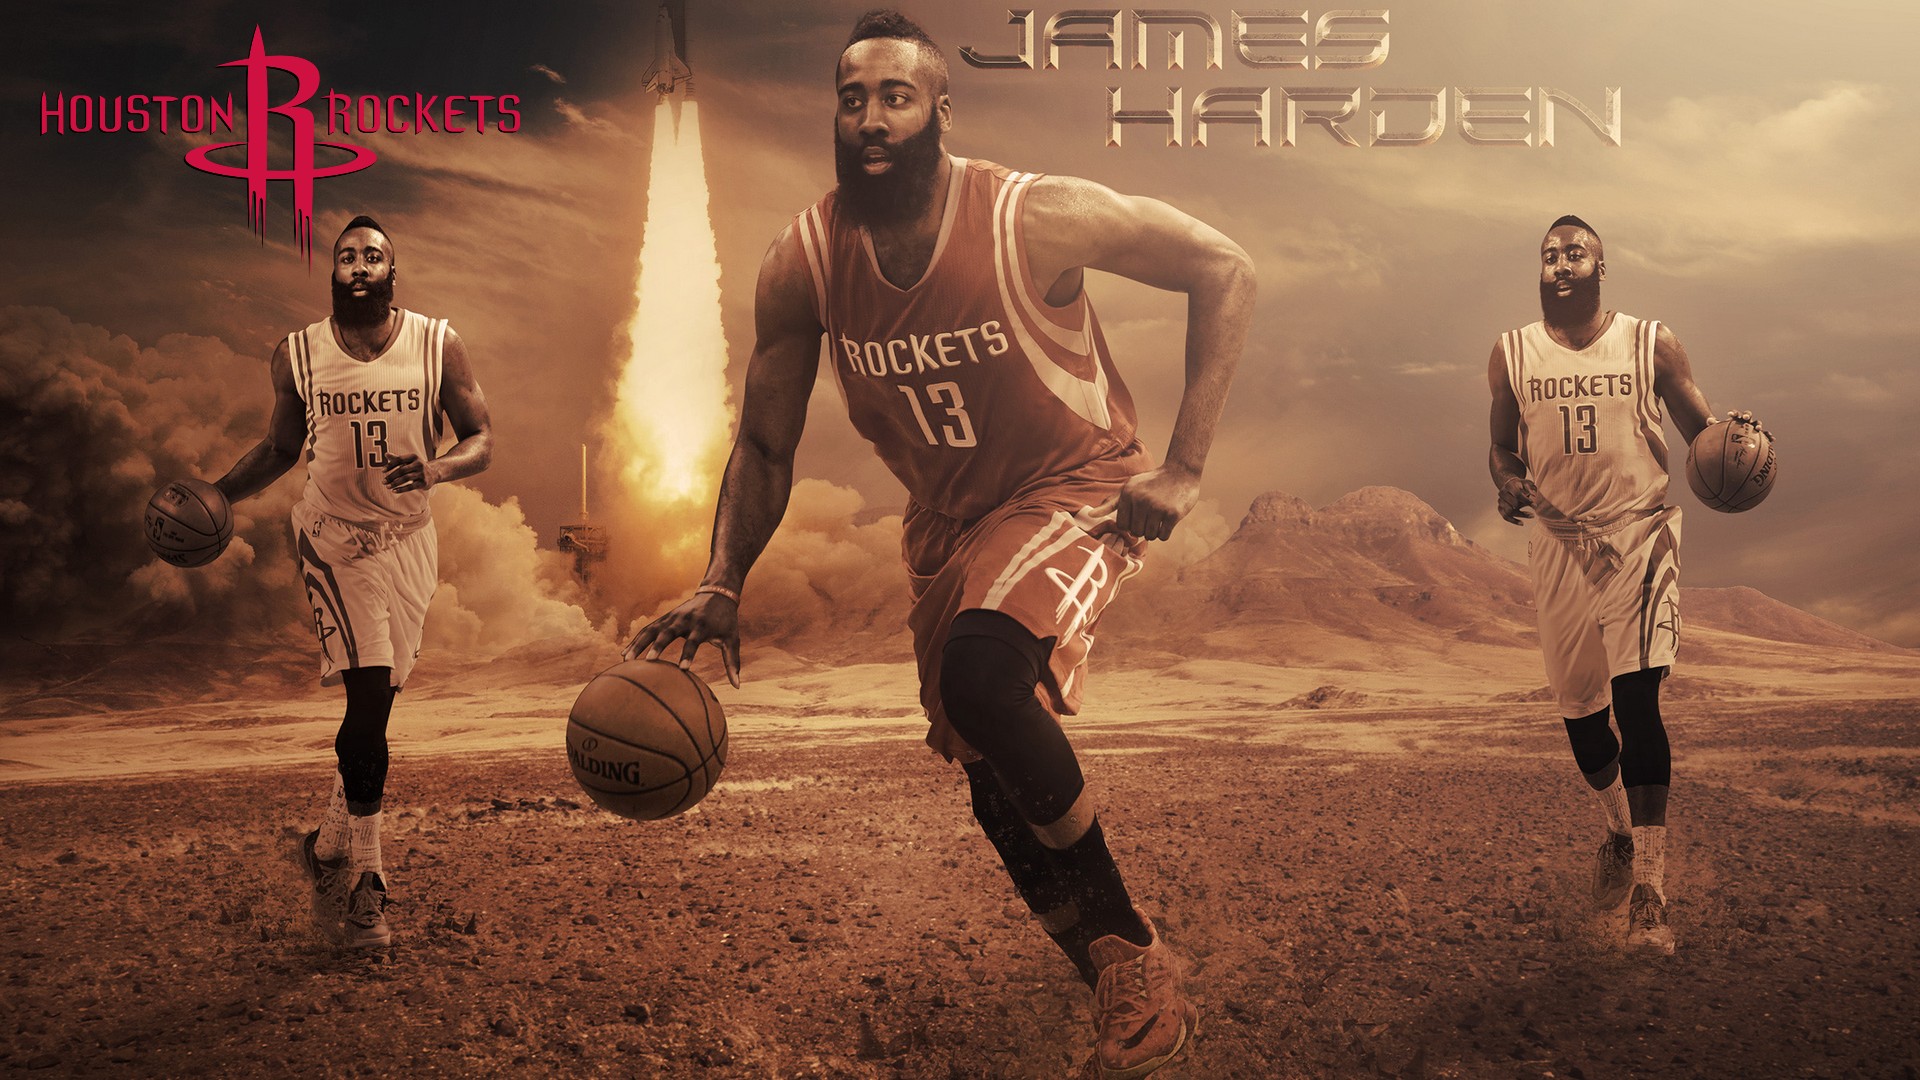 HD Desktop Wallpaper James Harden with image dimensions 1920x1080 pixel. You can make this wallpaper for your Desktop Computer Backgrounds, Windows or Mac Screensavers, iPhone Lock screen, Tablet or Android and another Mobile Phone device